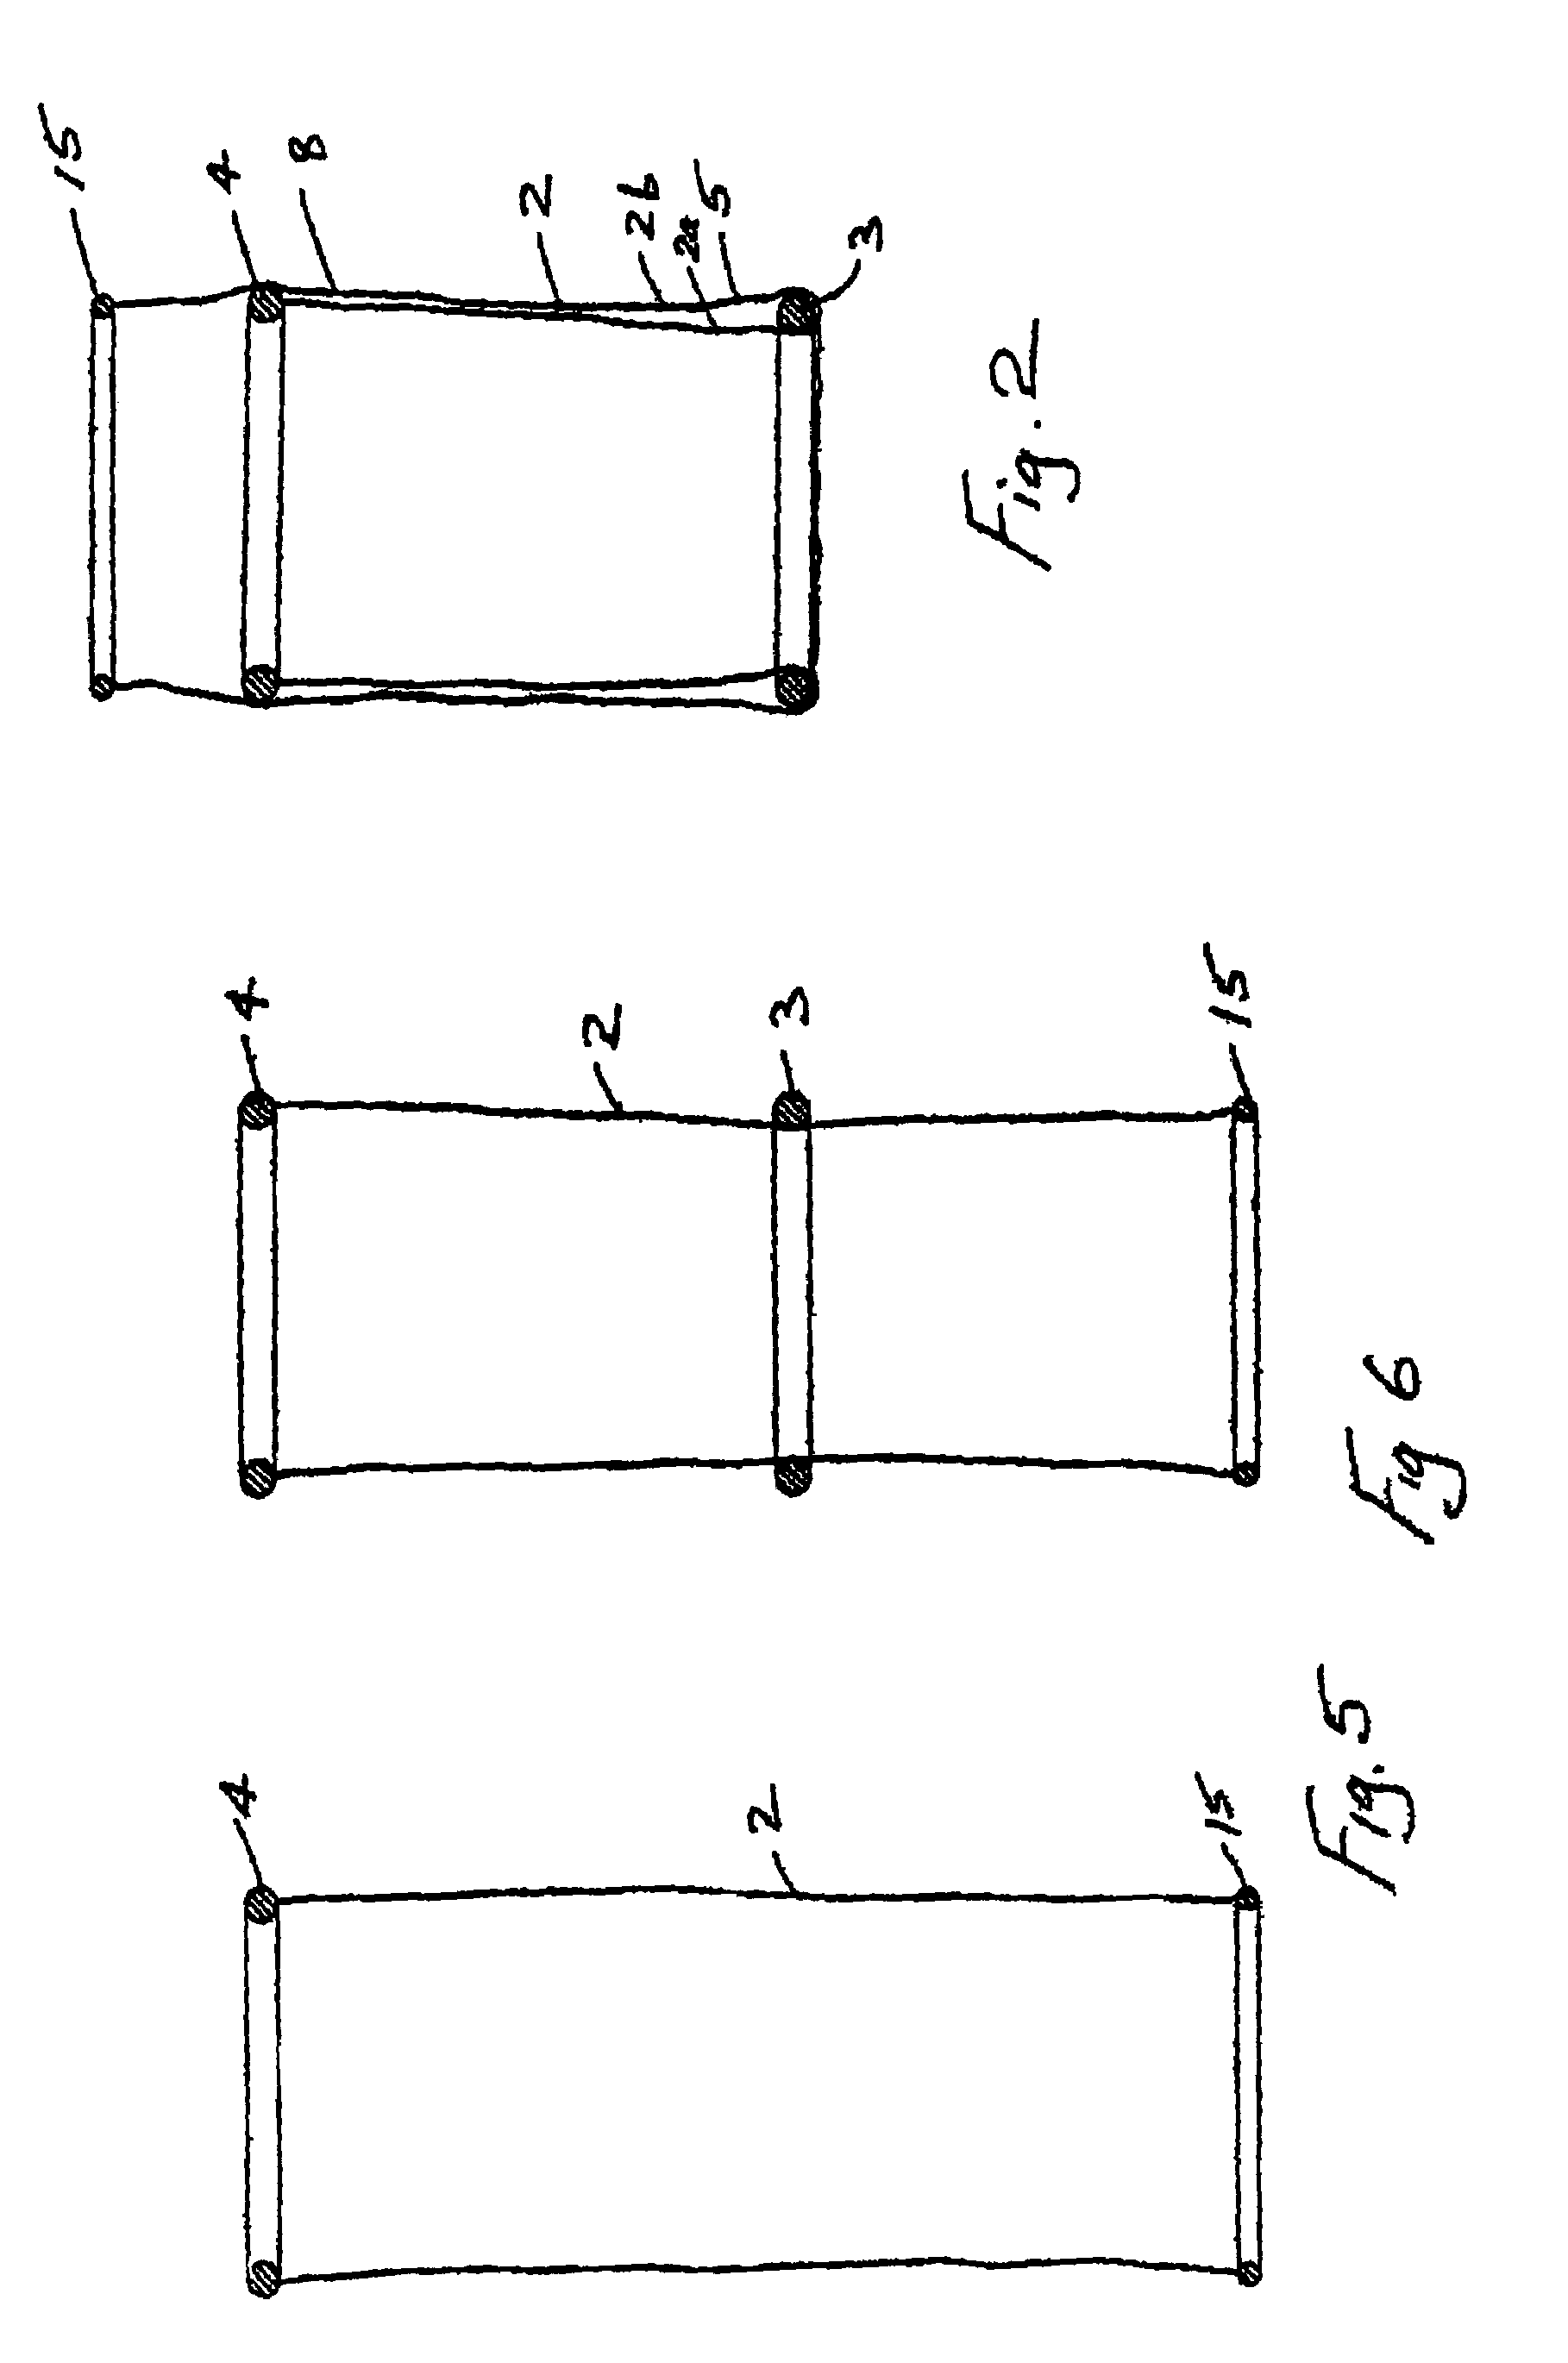 Wound retractor device